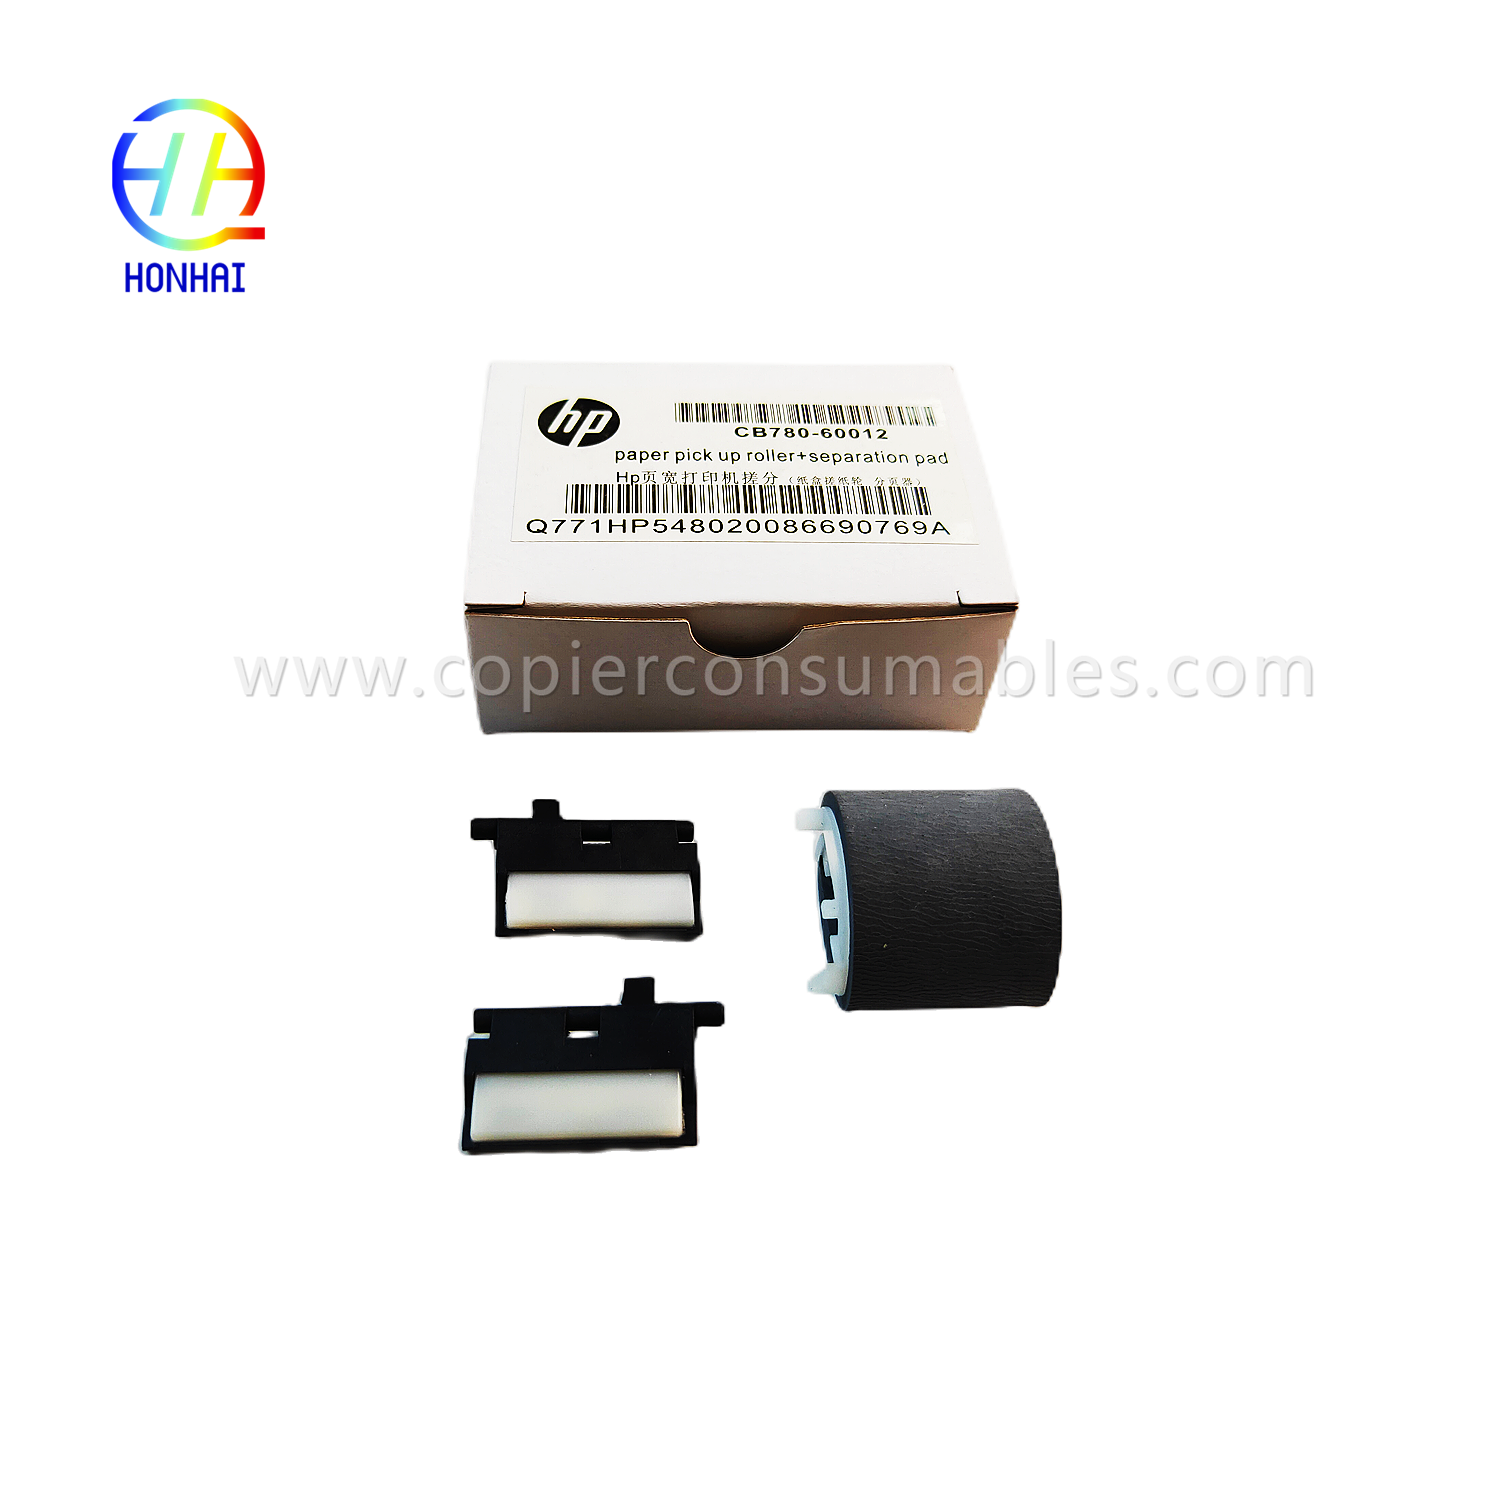 https://www.copierconsumables.com/paper-pickup-roller-separates-pad%ef%bc%88set%ef%bc%89for-hp-pagewide-x585z-x451dn-x476dn-x551dw-x576dw-556dn-58 452dn-477dn-552-577z-cb780-60012-chinthu/